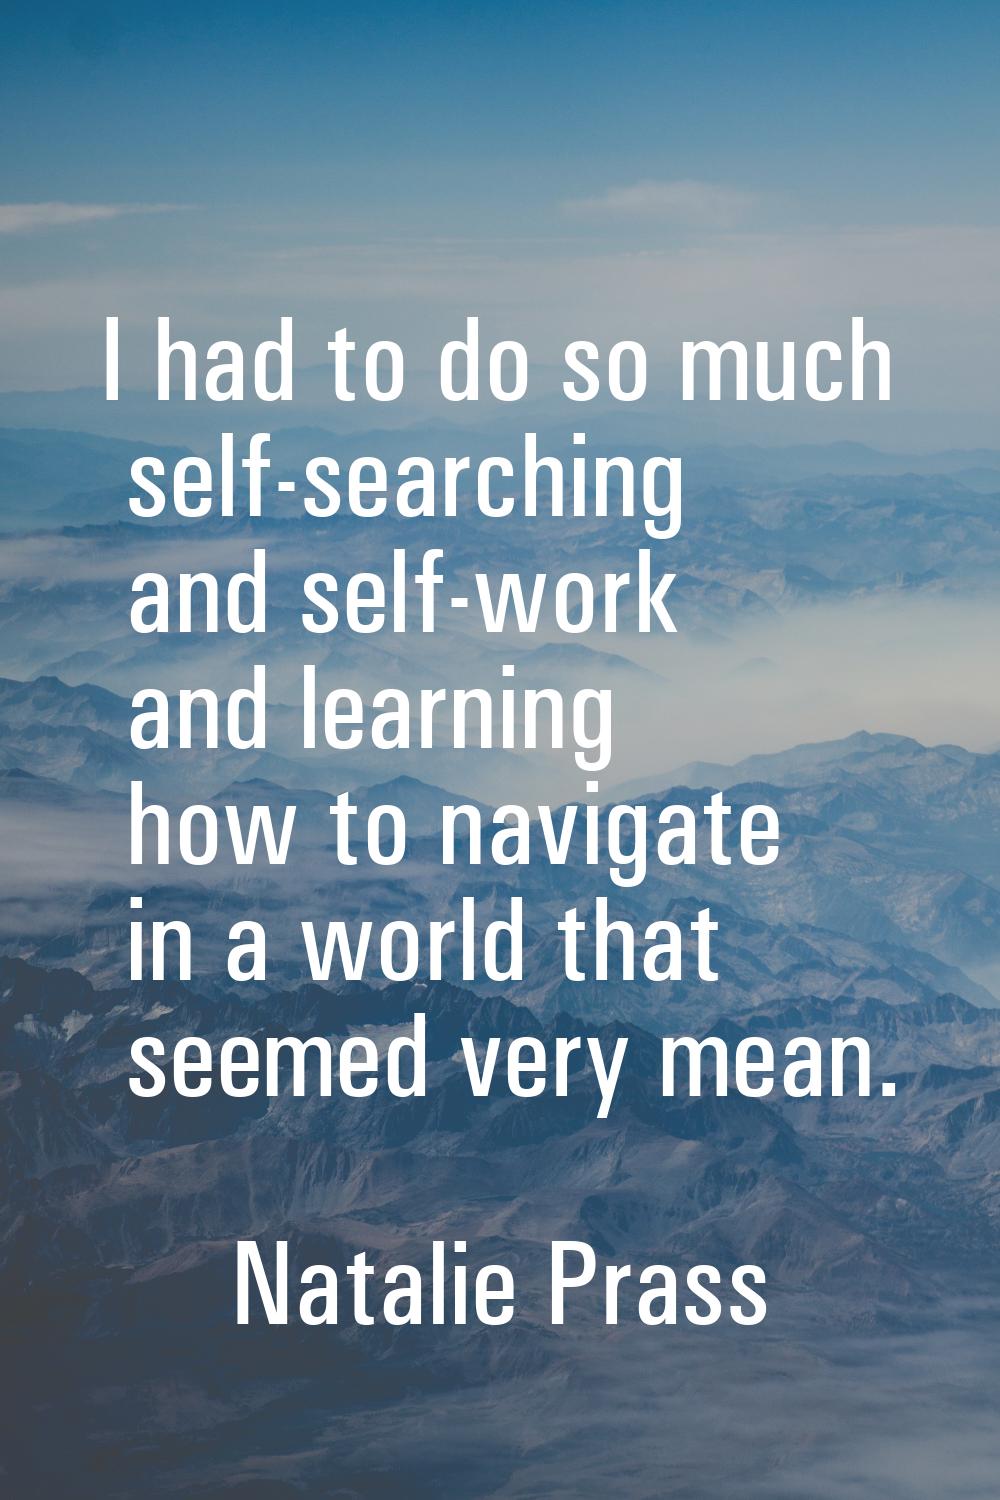 I had to do so much self-searching and self-work and learning how to navigate in a world that seeme